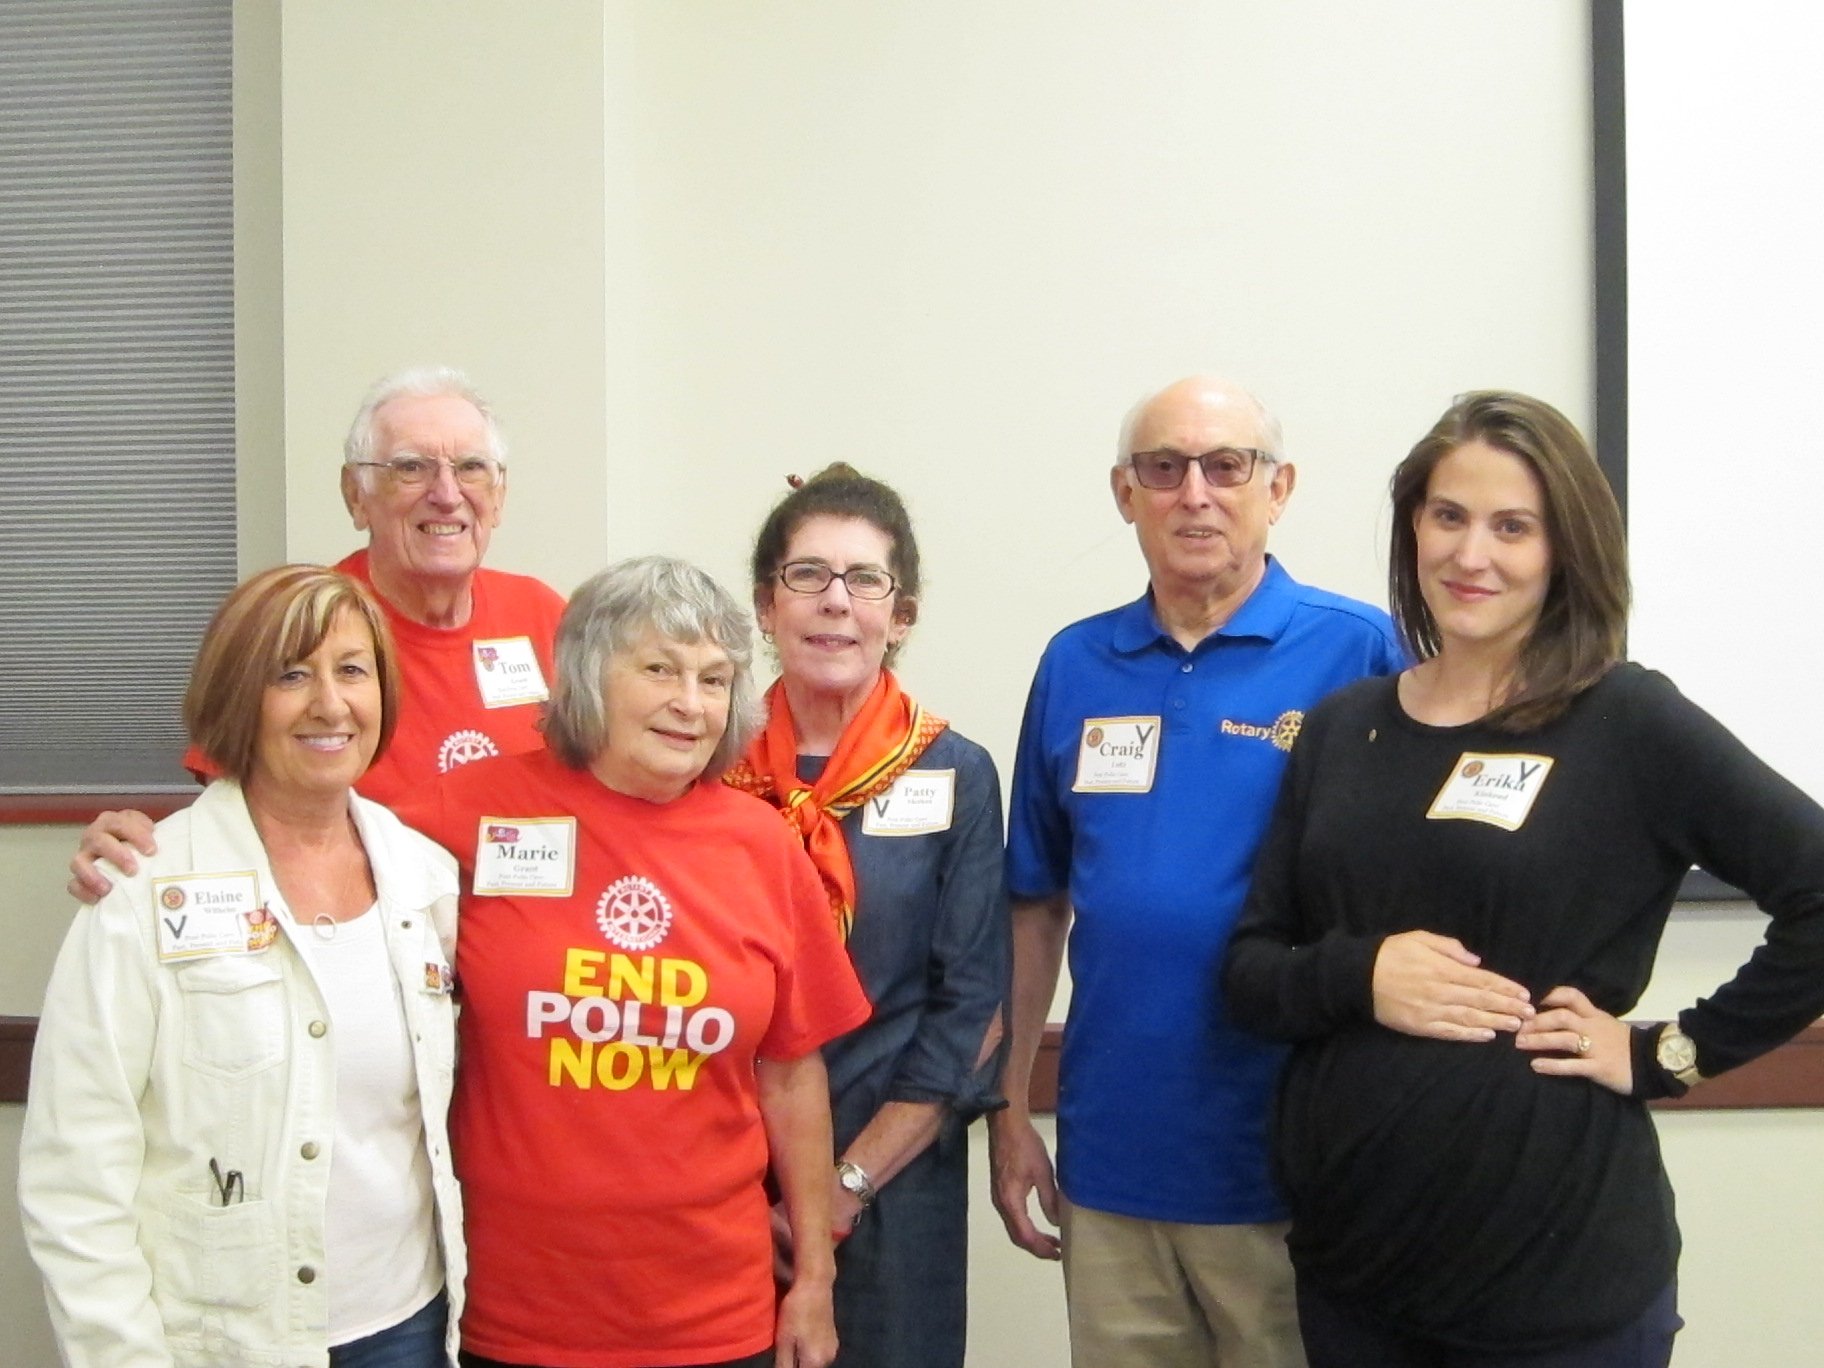  Survivor Conference - Rotarians from Survivor Tom Grant’s Rotary Club assisted disabled survivors at the Cranberry, PA Location, 2017 